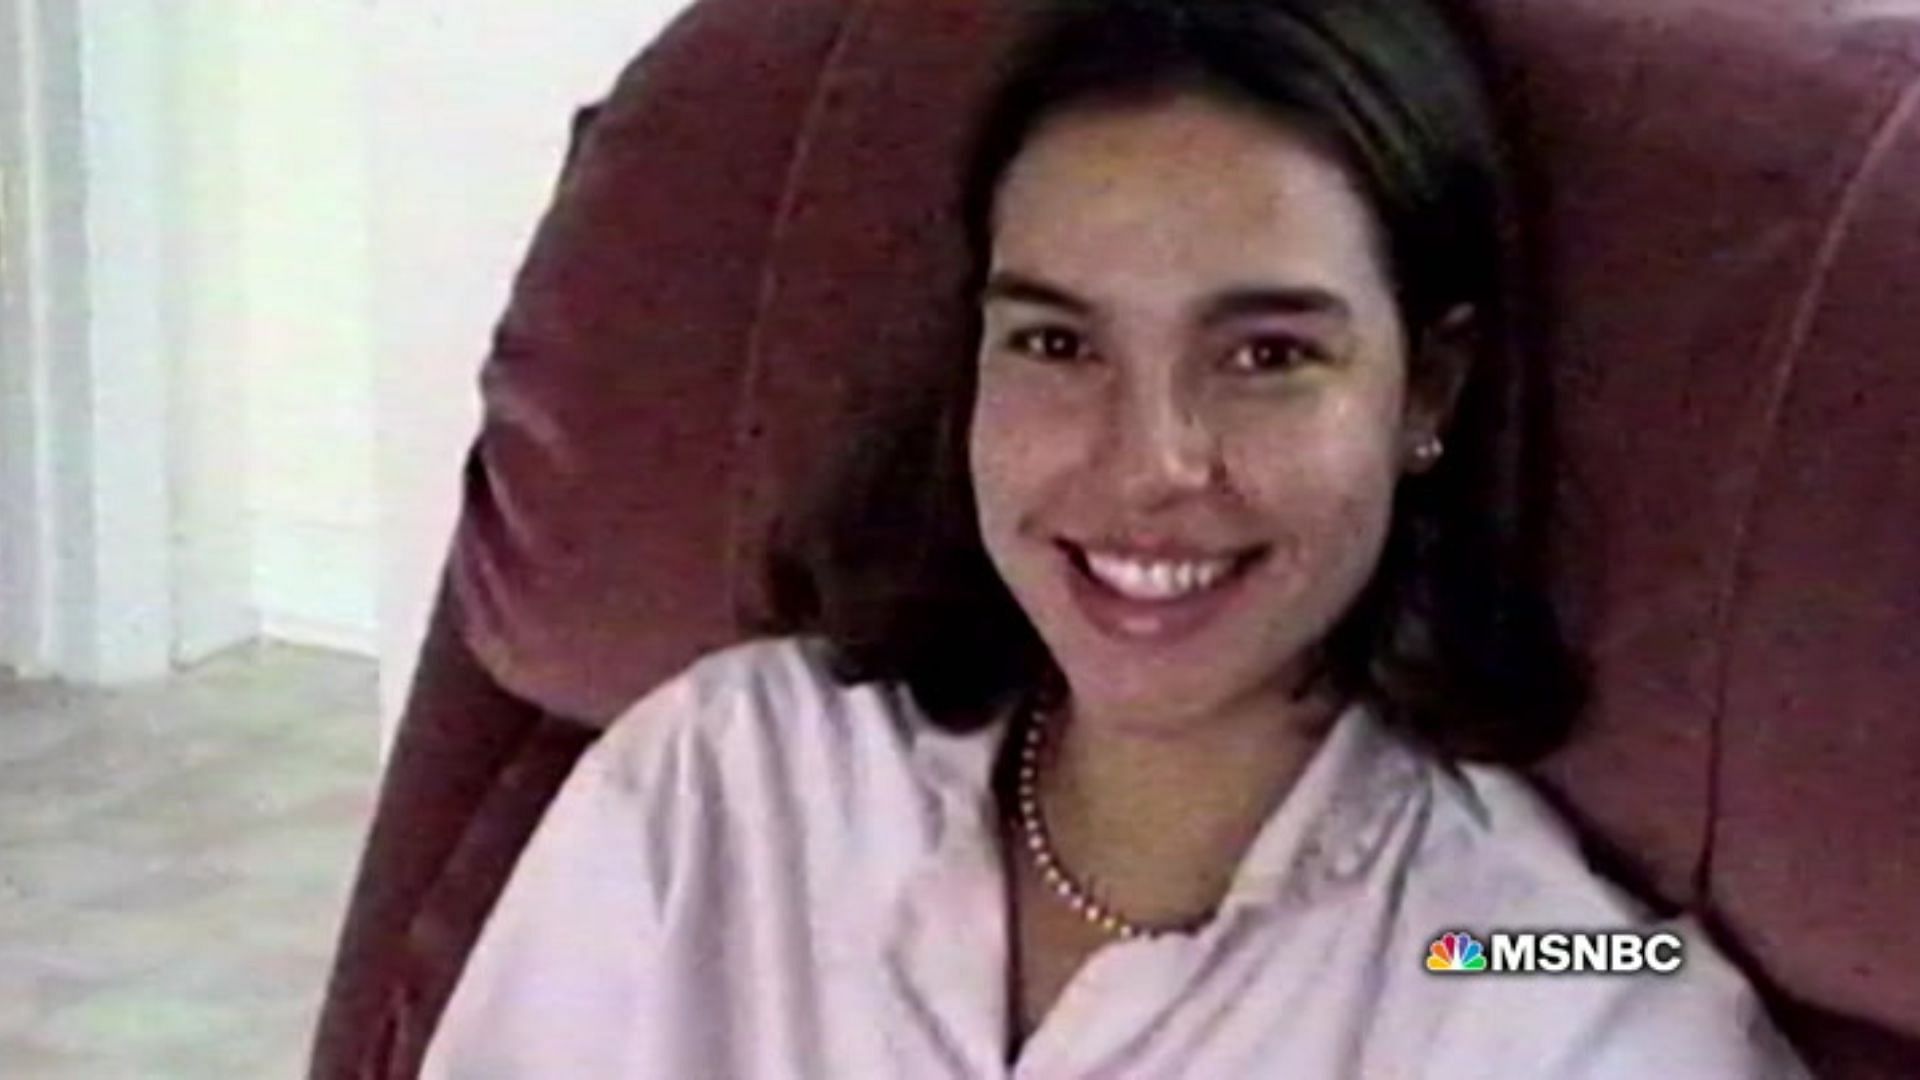 Wendy Trapaga was murdered by her husband, Michel Escoto (Image via MSNBC)